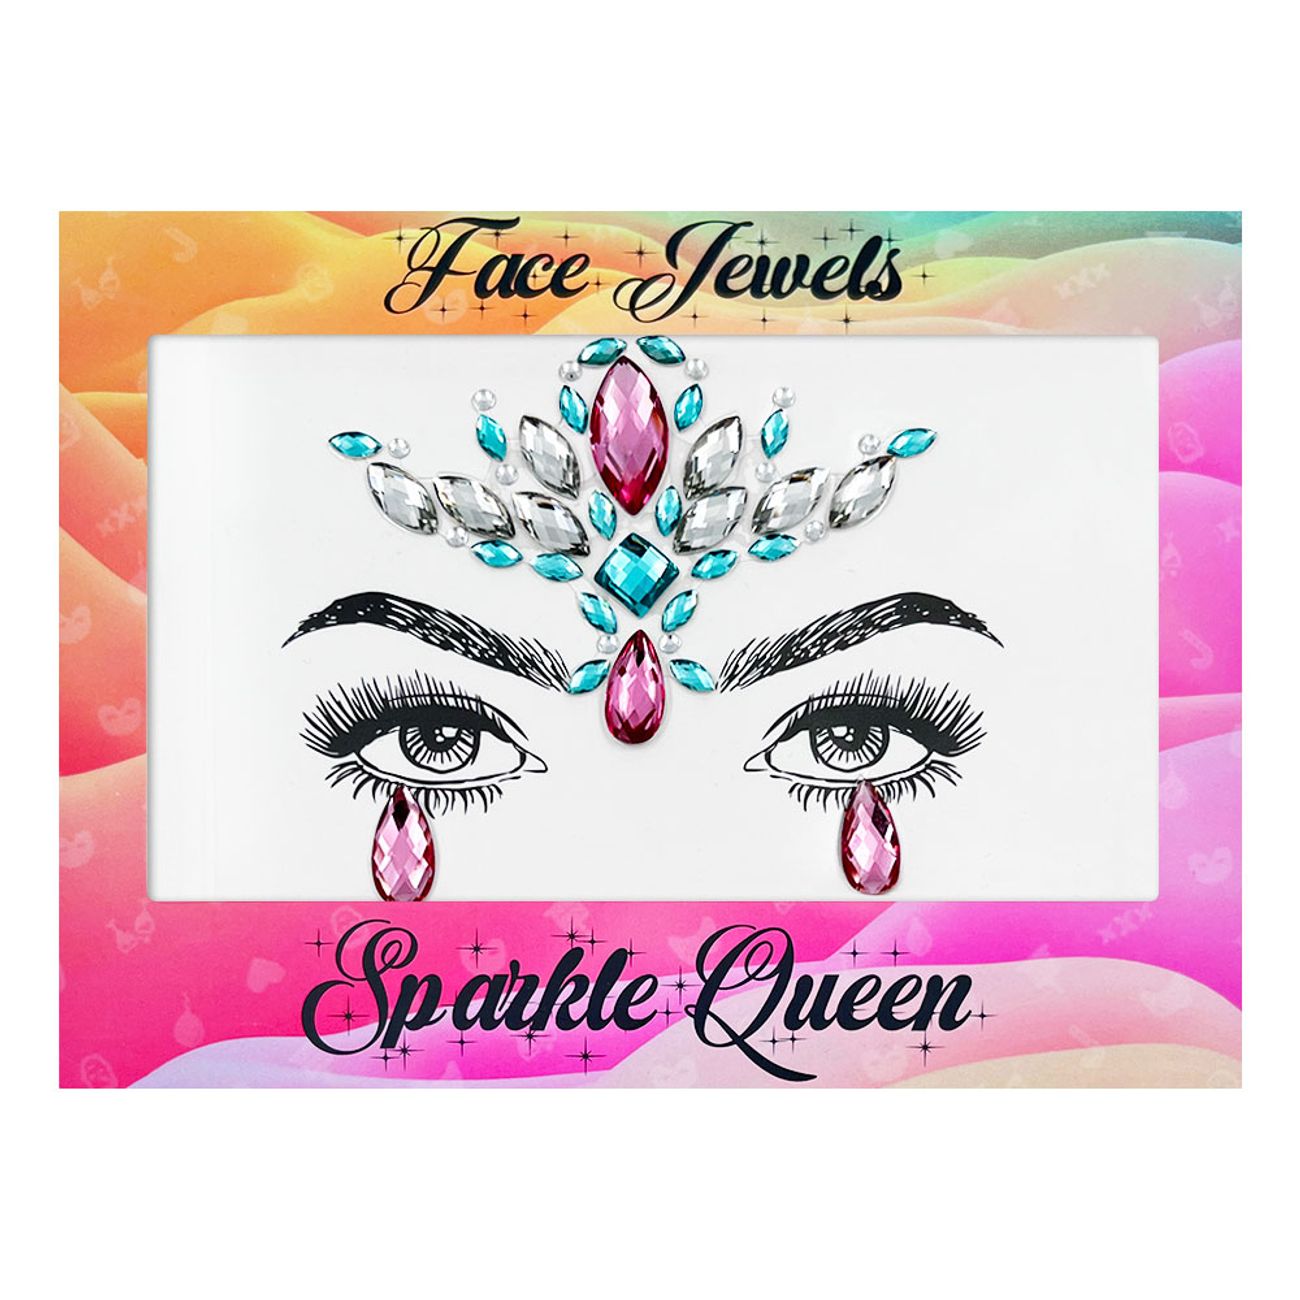 face-jewels-sparkle-queen-marry-83435-1